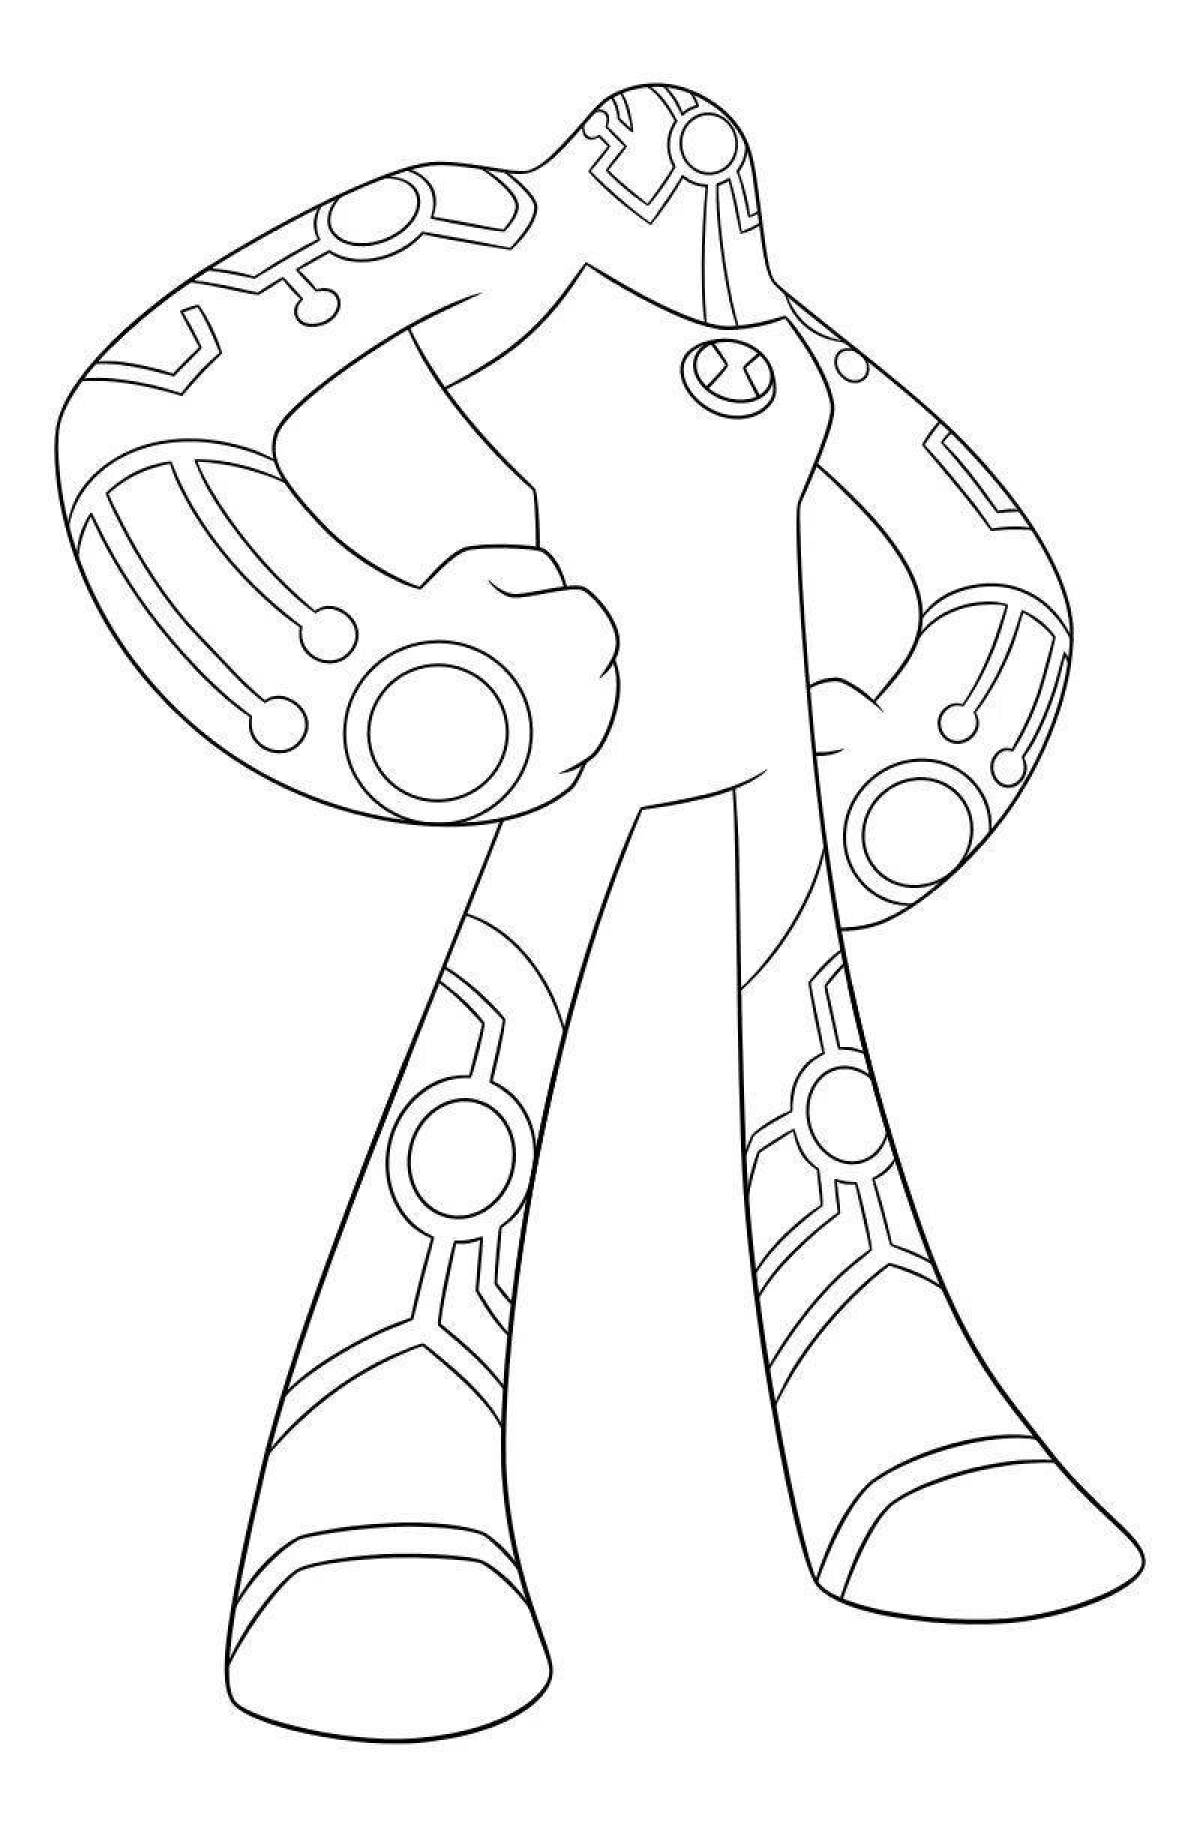 Color-explosion coloring page turn on for boys